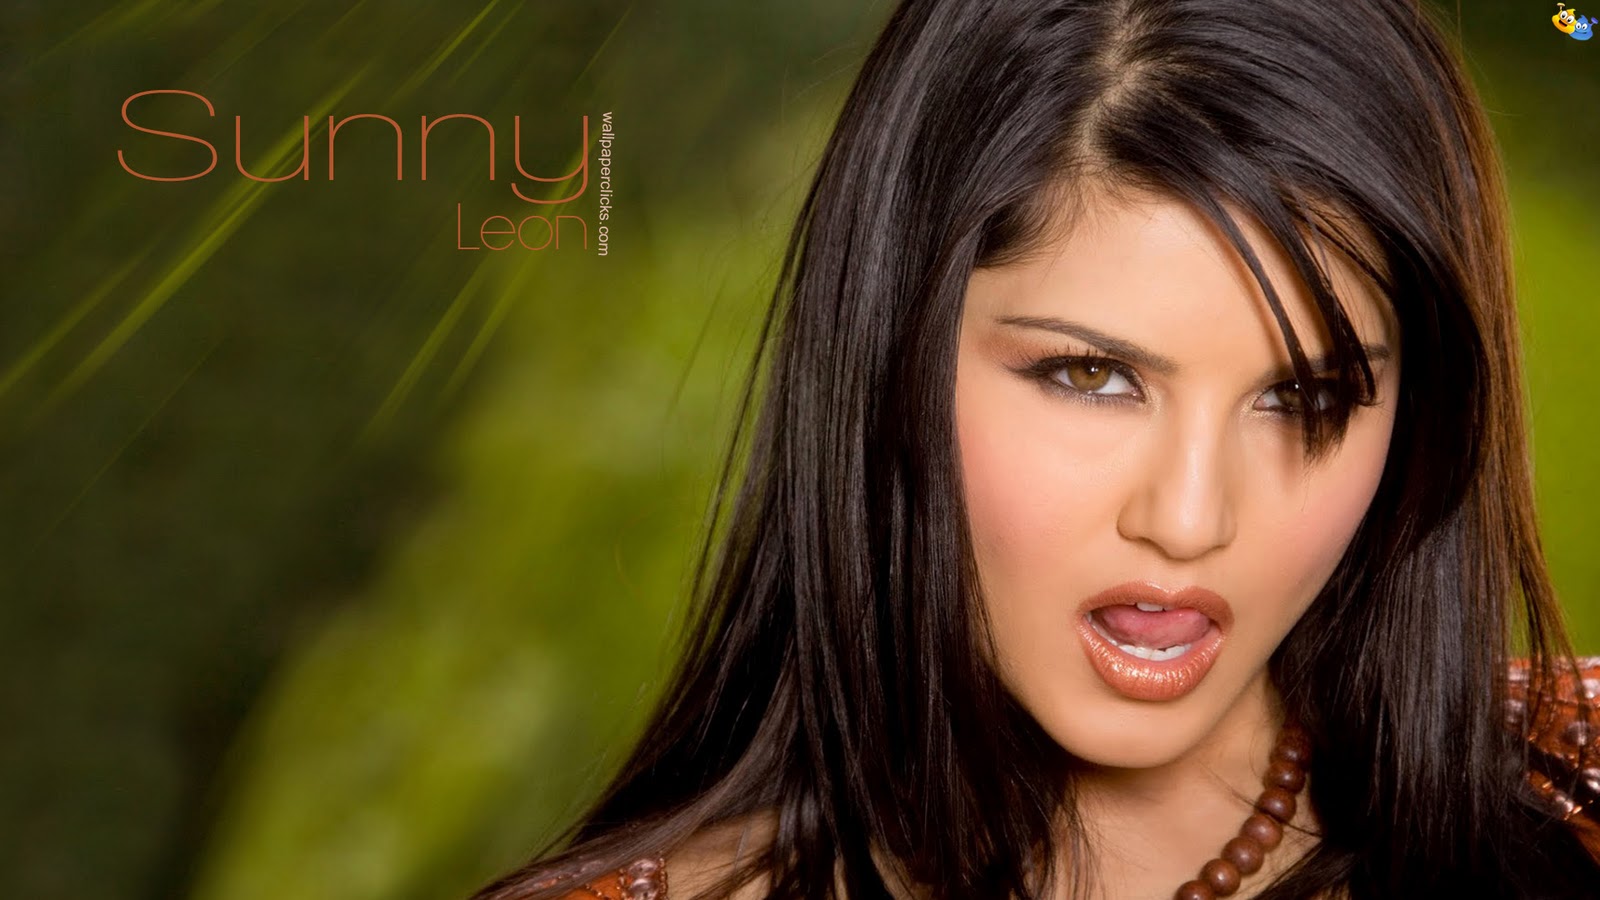 Top 101 Reviews: Sunny Leone HD Wallpapers 2012